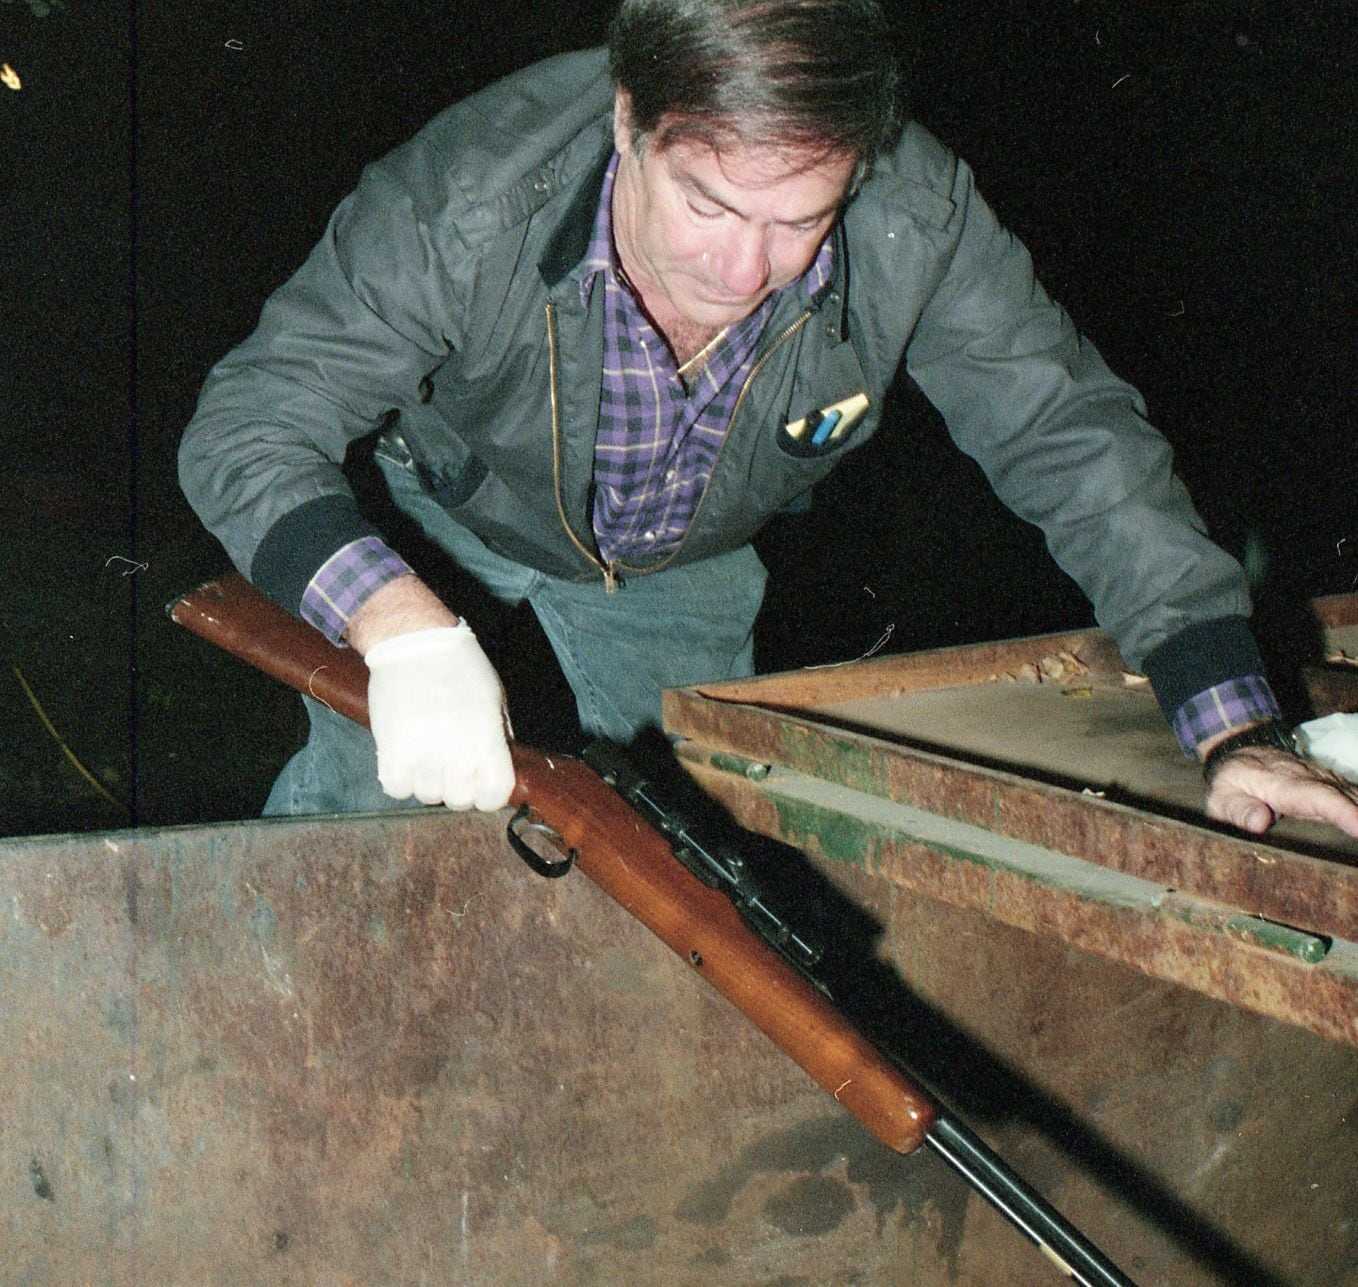  Boston police searched through a dumpster, looking for the gun used in the murder of Carol Stuart on Oct. 29, 1989.